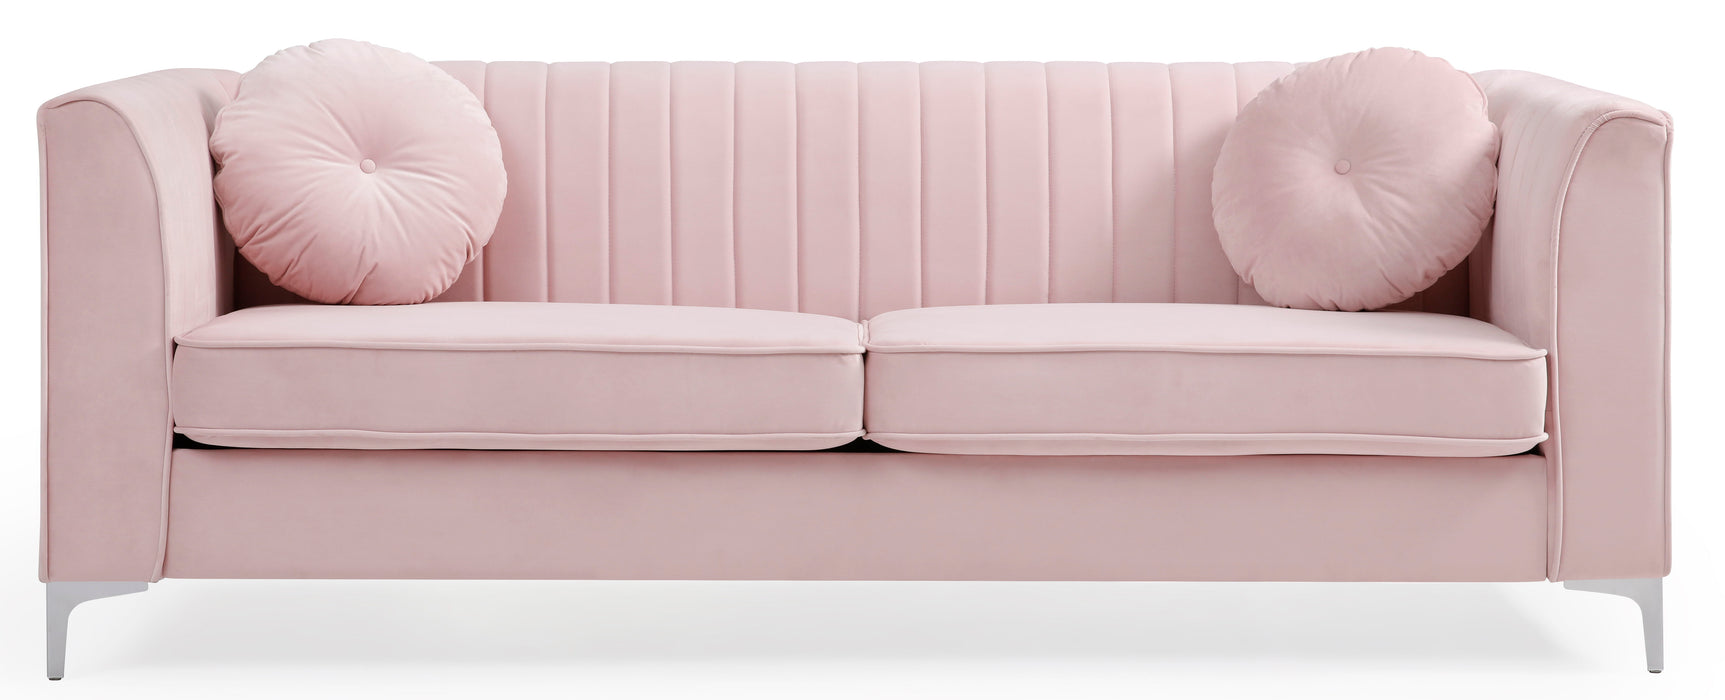 Glory Furniture Delray Sofa (2 Boxes), Pink